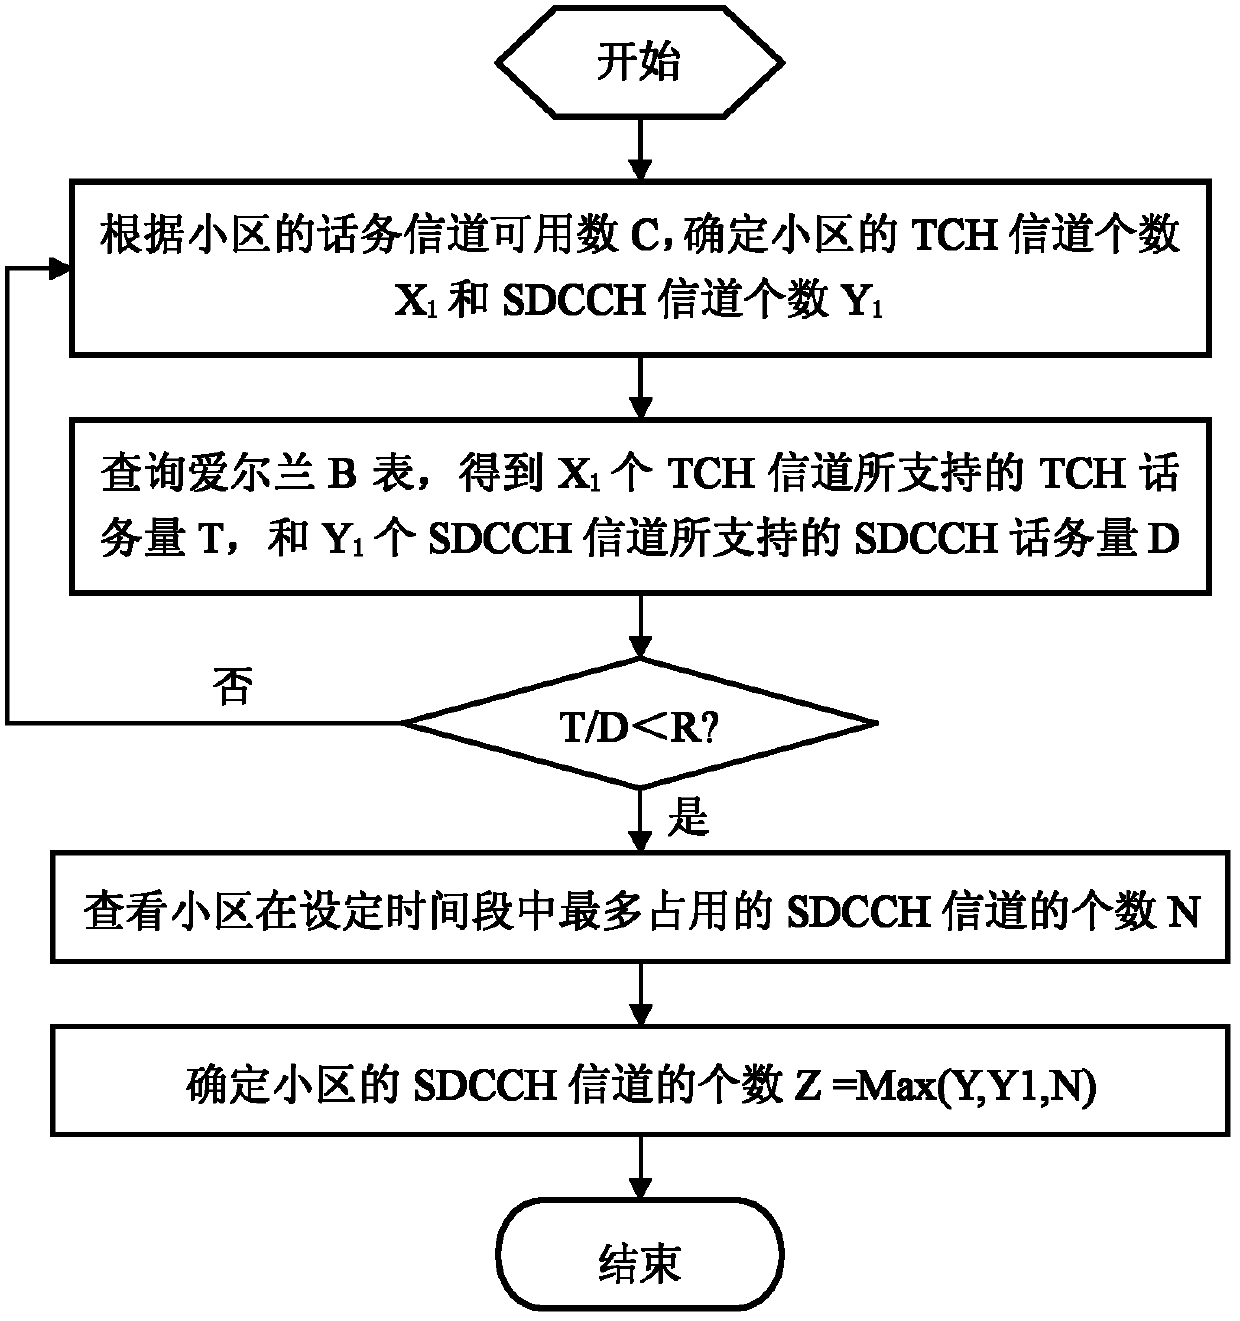 Standalone dedicated control channel (SDCCH) configuration method